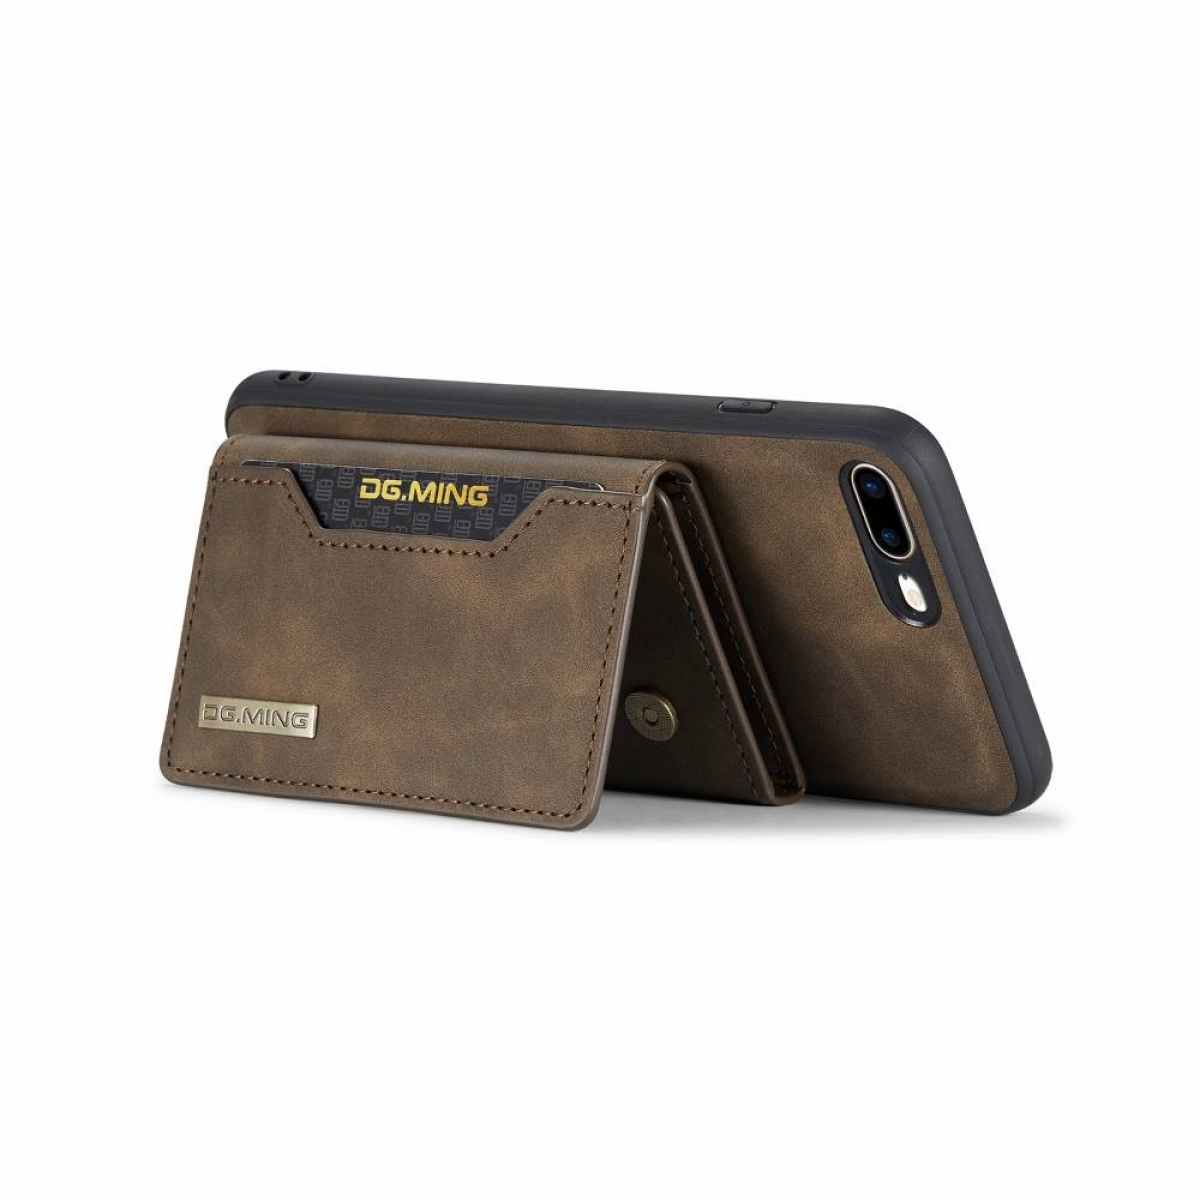 Backcover, 7 DG Apple, iPhone M2 Coffee Plus, 2in1, MING